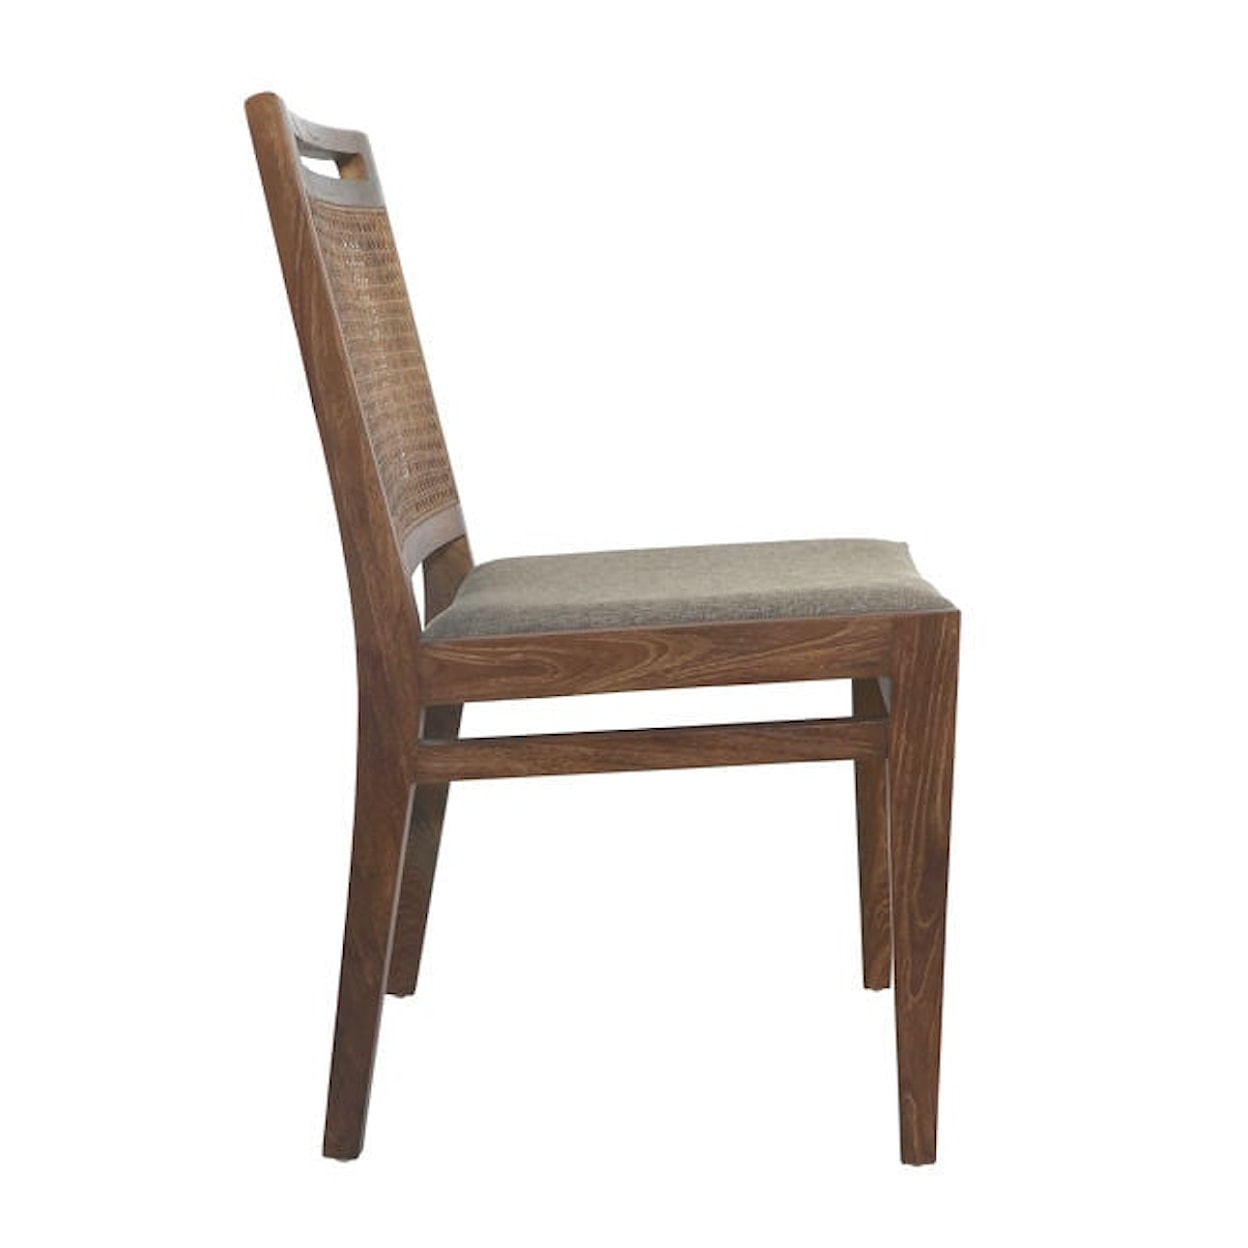 Dovetail Furniture Dovetail Accessories Brinda Dining Chair Set Of 2